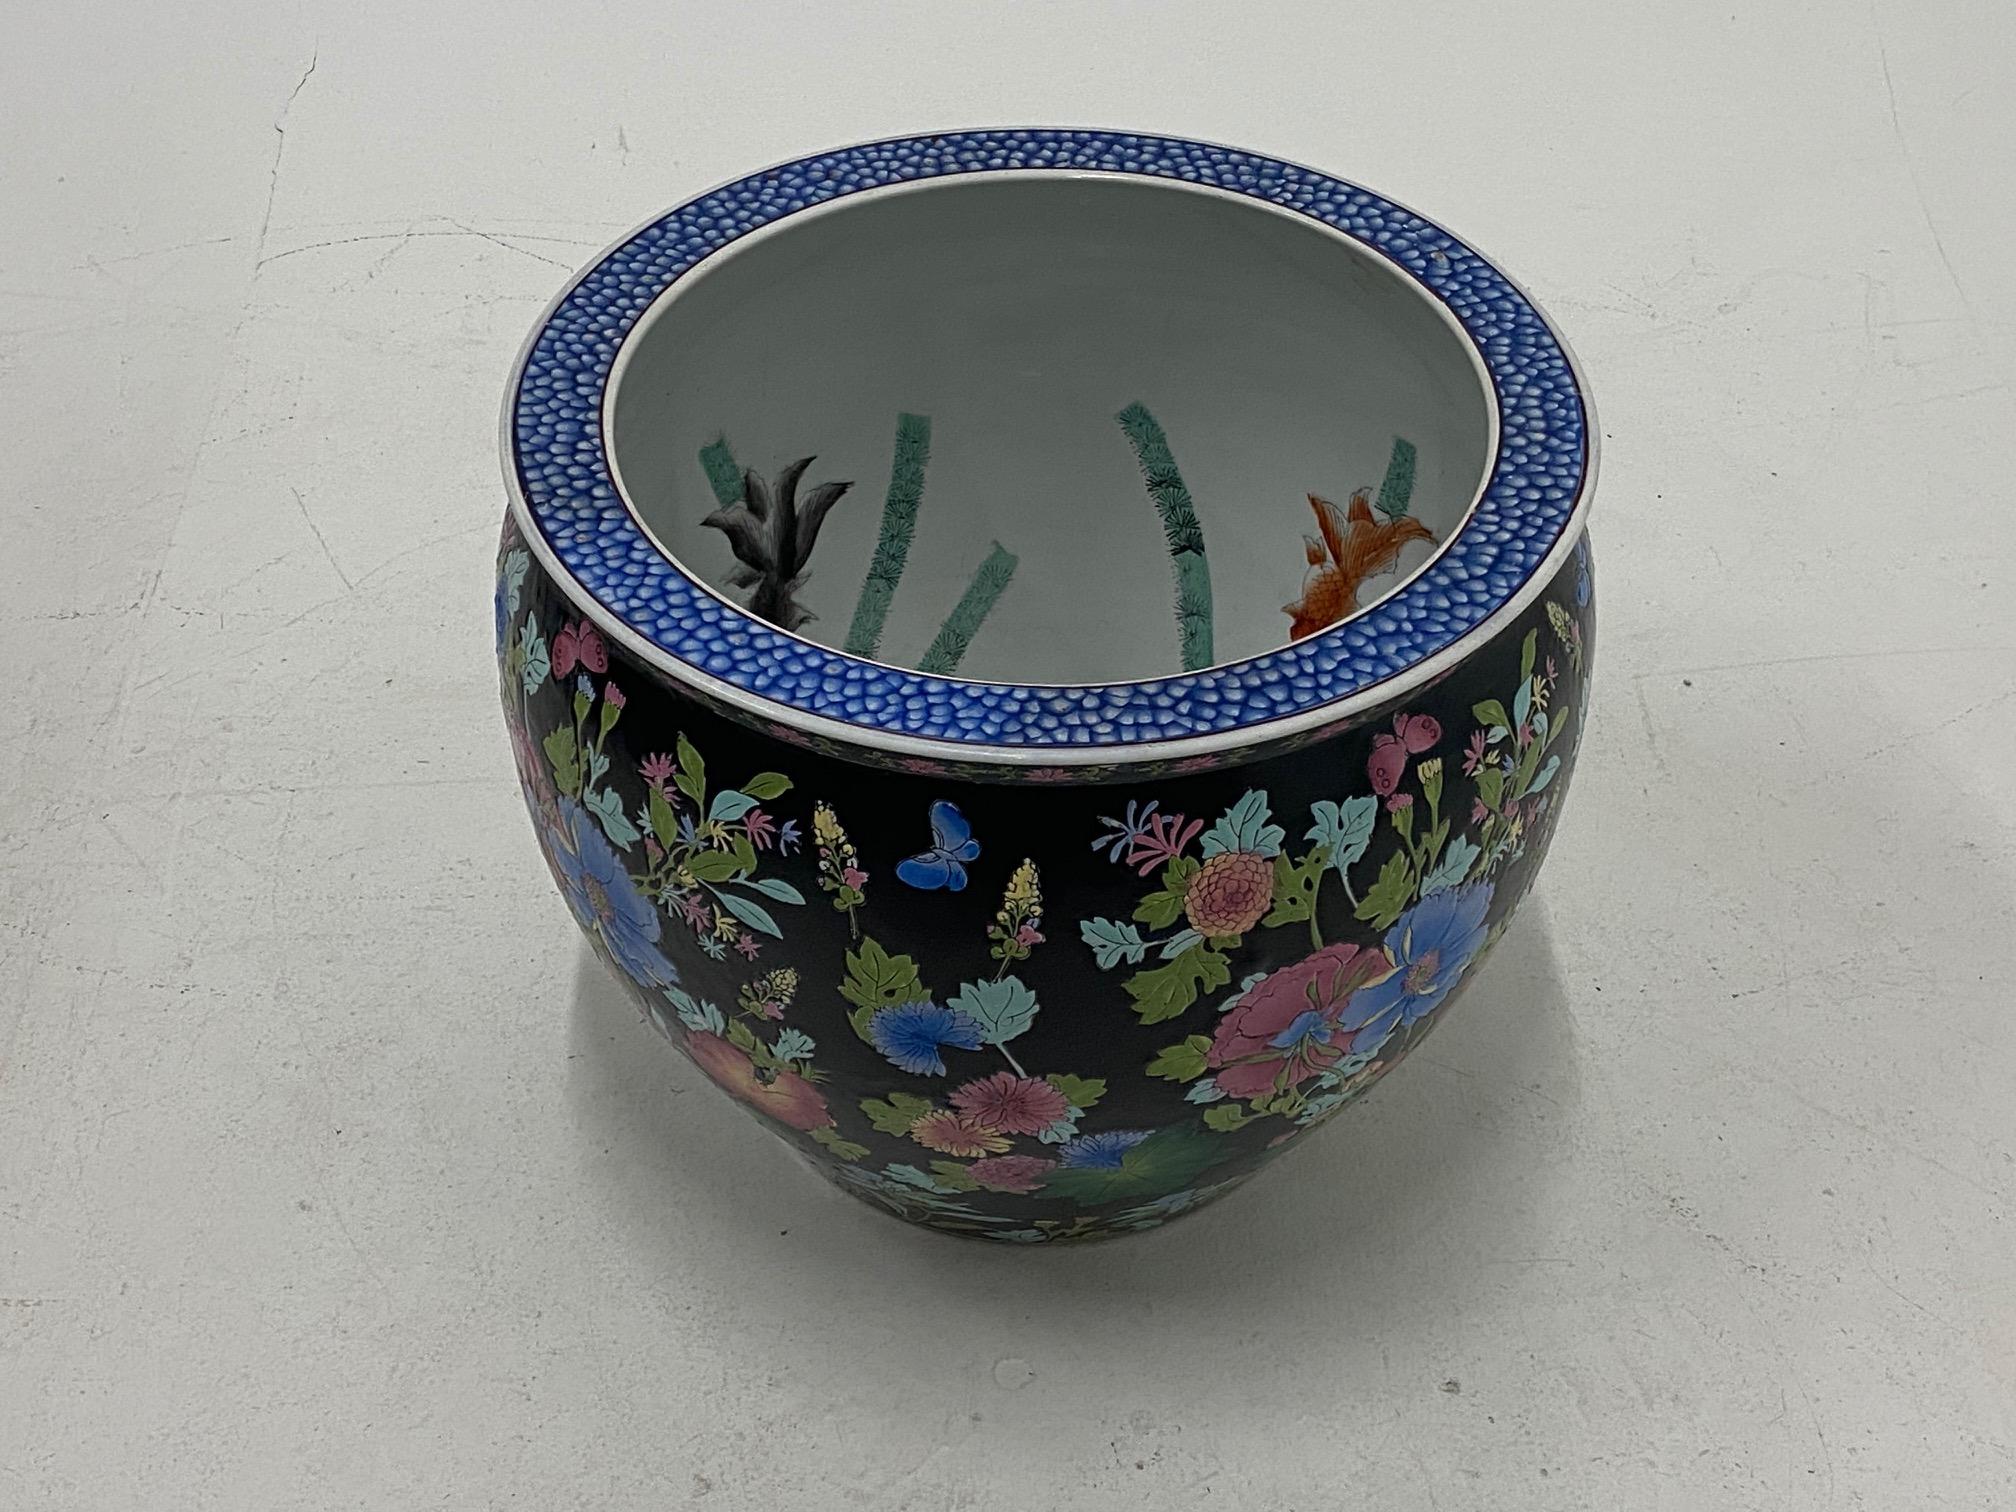 Gorgeous Chinese porcelain fish bowl having striking black background on the exterior with elaborate floral decoration and koi fish with bamboo against white on the inside. The rim is a wonderful contrasting blue and white pattern.
Opening is 15